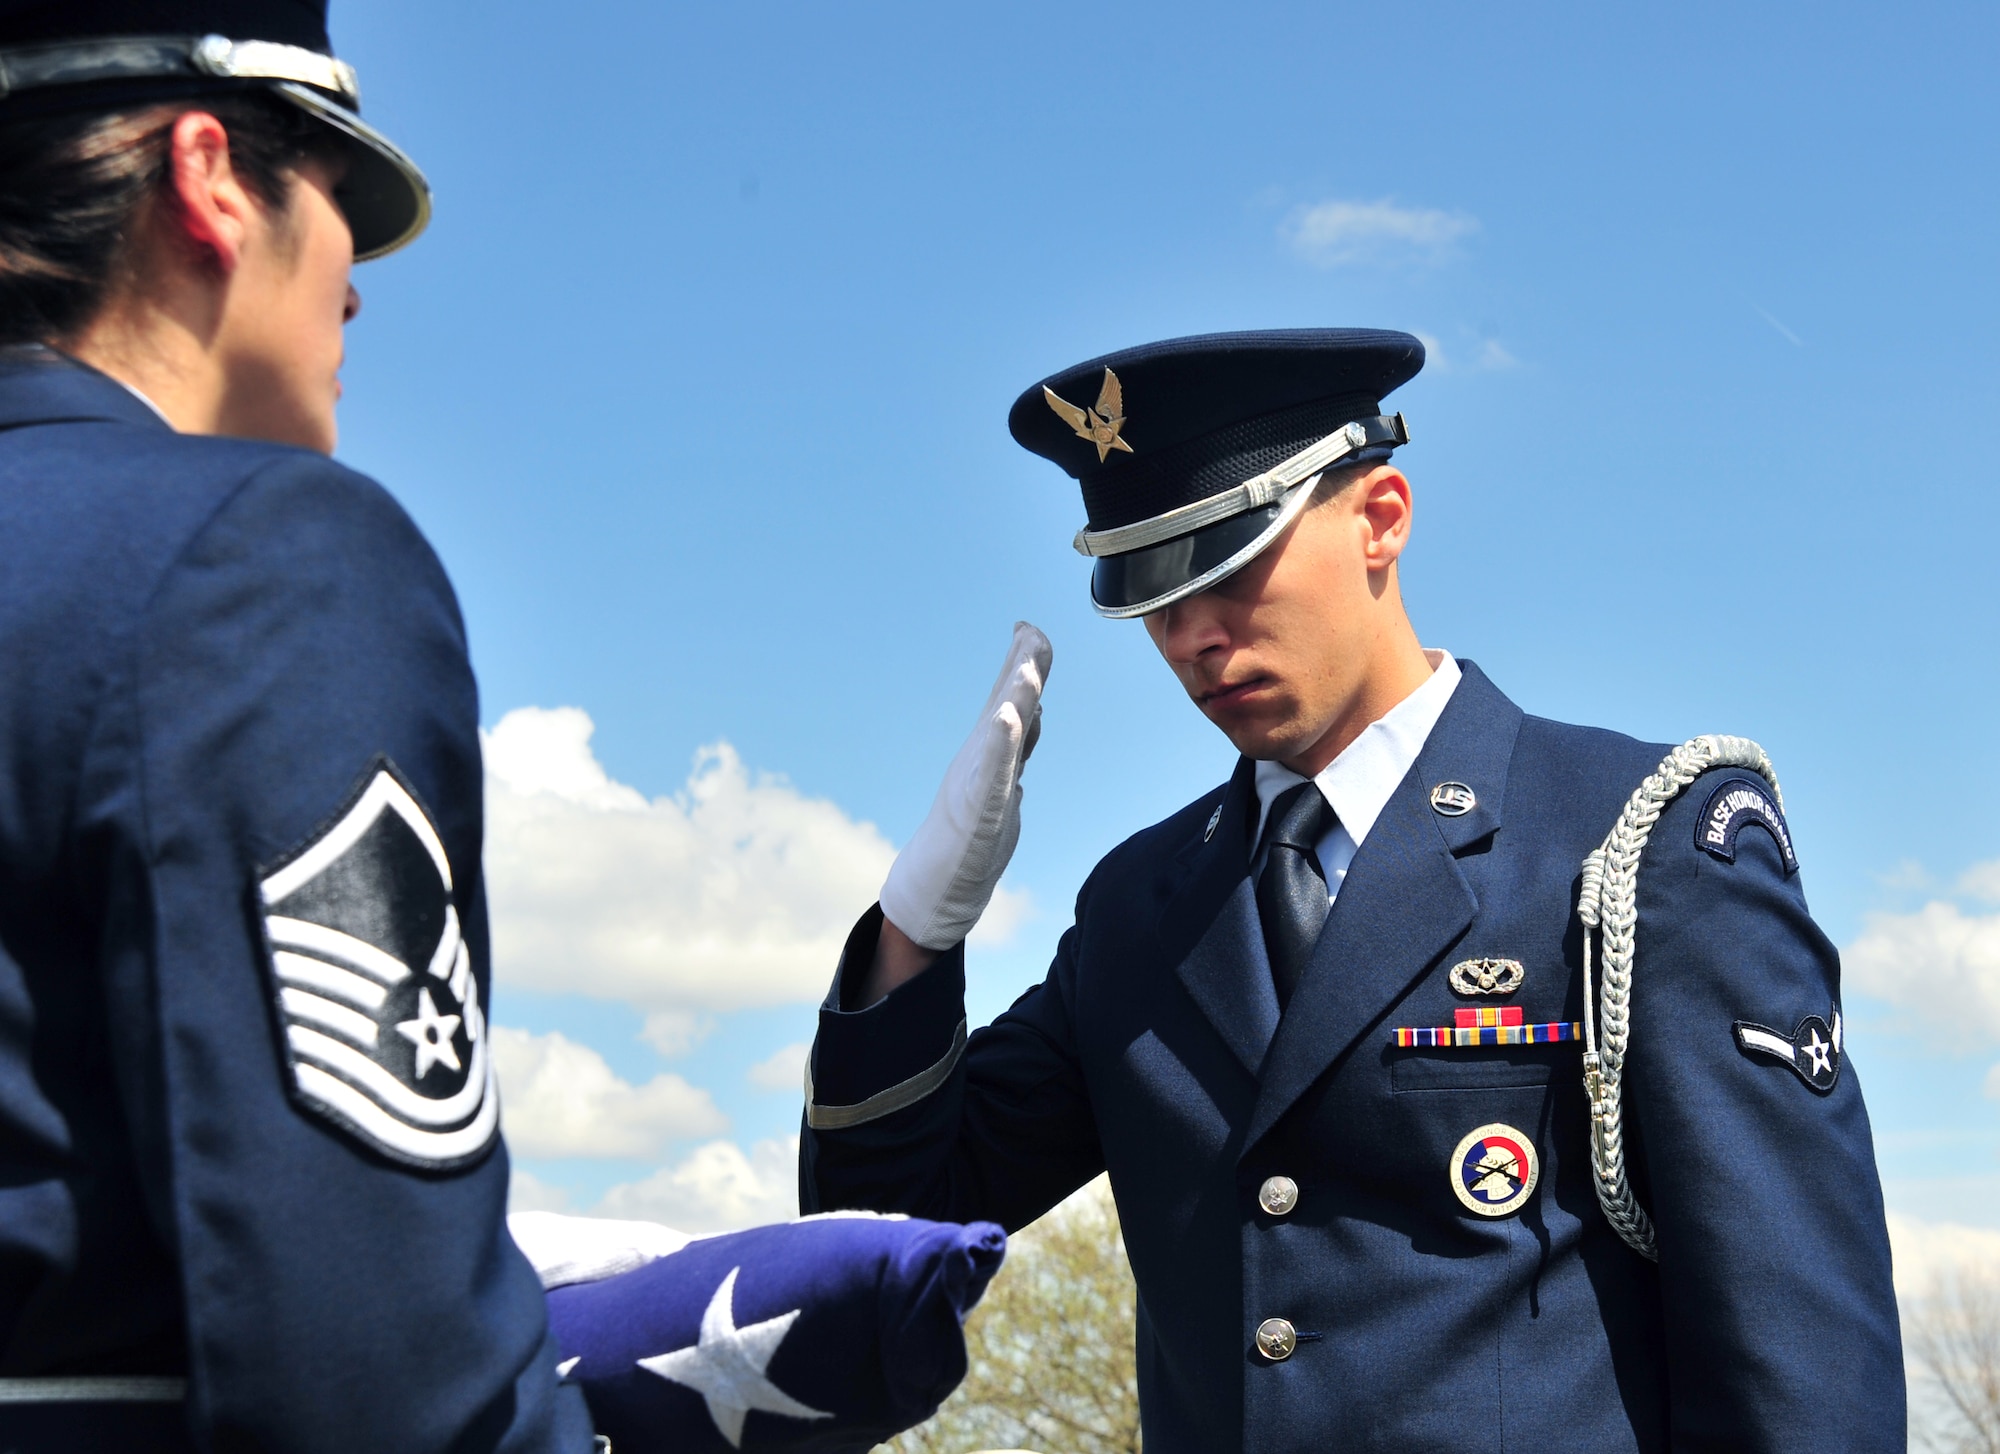 Members of Whiteman Honor Guard practice the procedures of a military funeral at Knob Noster cemetery in Knob Noster, Mo., March 15, 2016. Whiteman Honor Guard serves more than 100 counties spanning Missouri to Kansas covering more than 70,000 square miles across both states. Whiteman Honor Guard represents the respect each fallen service member deserves, and upholds traditions held dear to the armed forces. (U.S. Air Force photo by Airman 1st Class Jovan Banks)